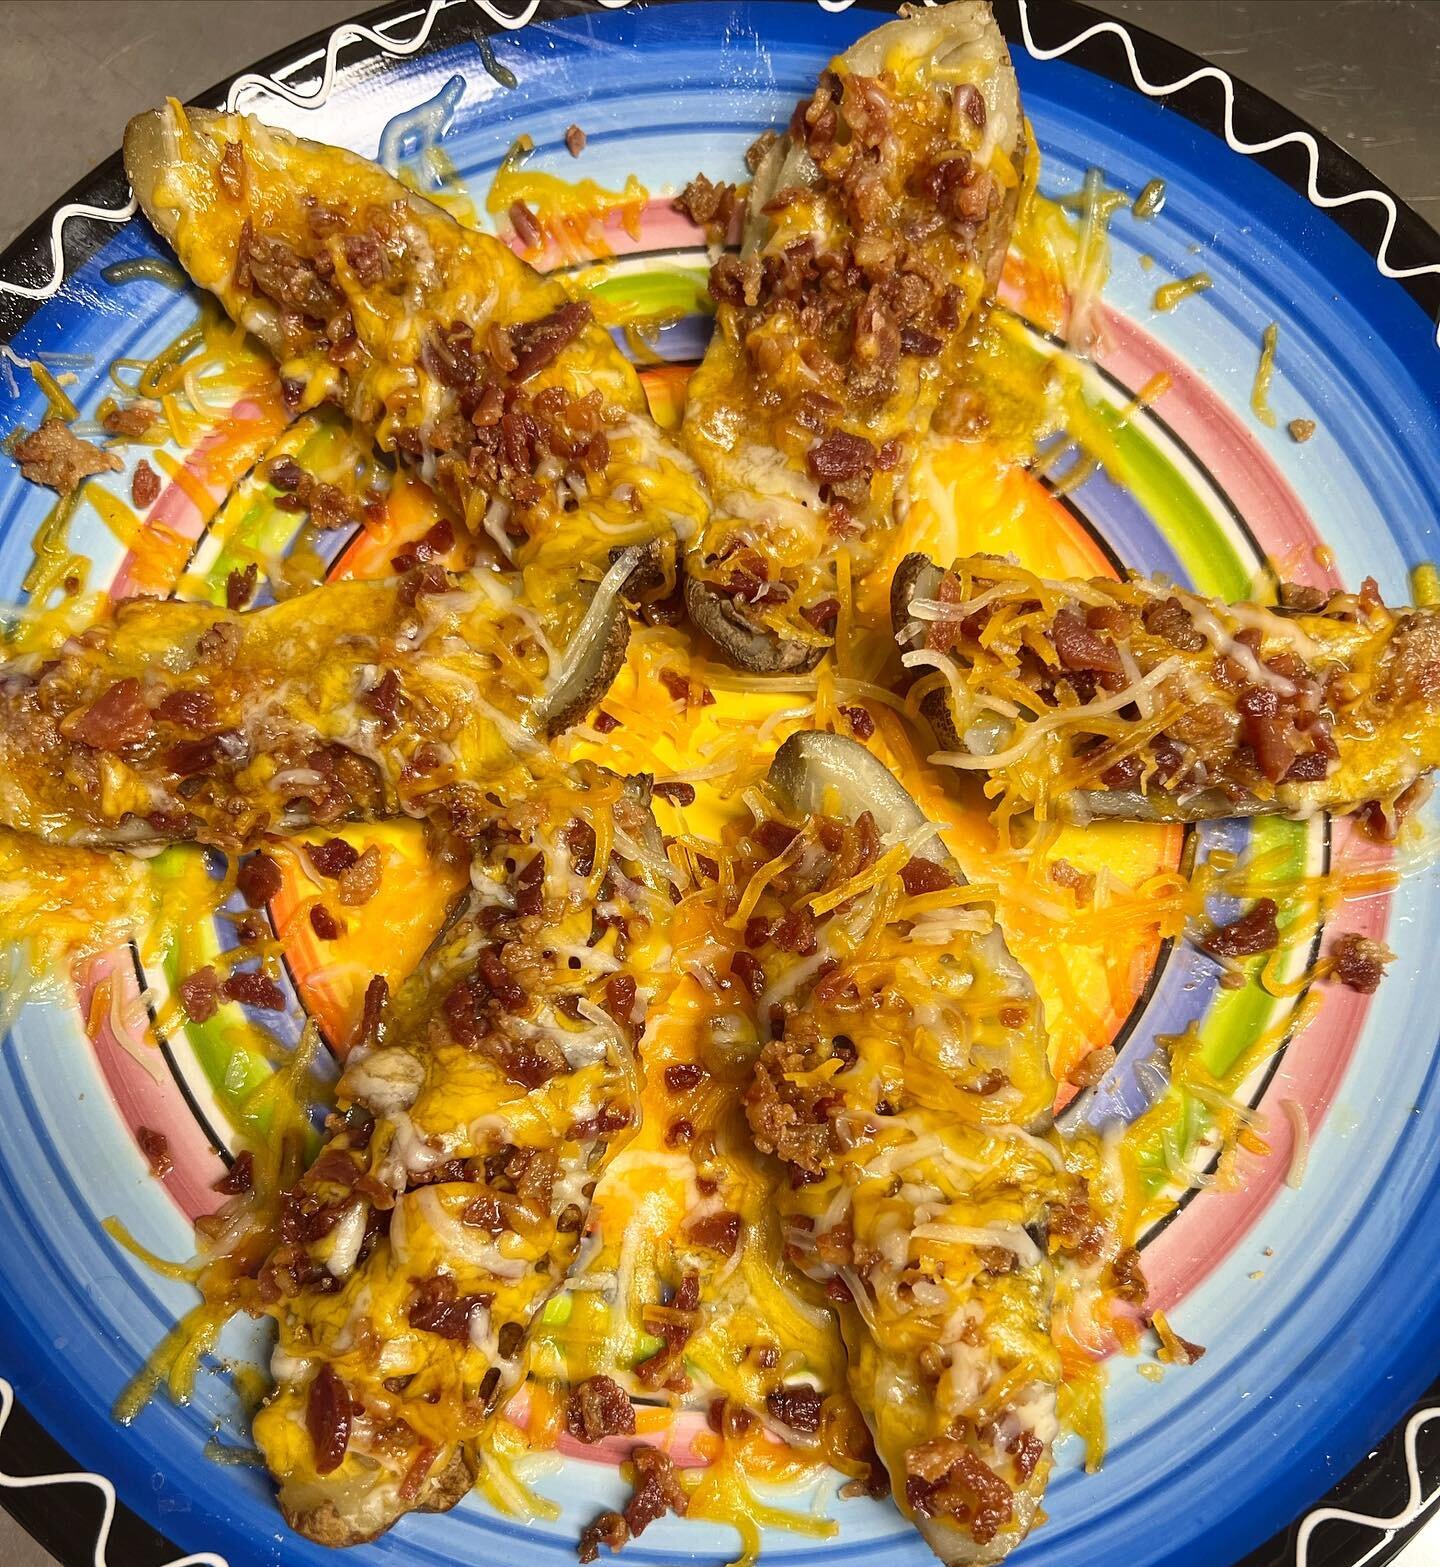 Loaded Potato Skins is a lunch favorite @theloungegvl !!! Usually served with bacon, cheese, sour cream, green onions, ranch, and BBQ sauce. Seasoned with @justrightseasoning - This customer asked for no sour cream, bbq sauce, or green onions!!! Come